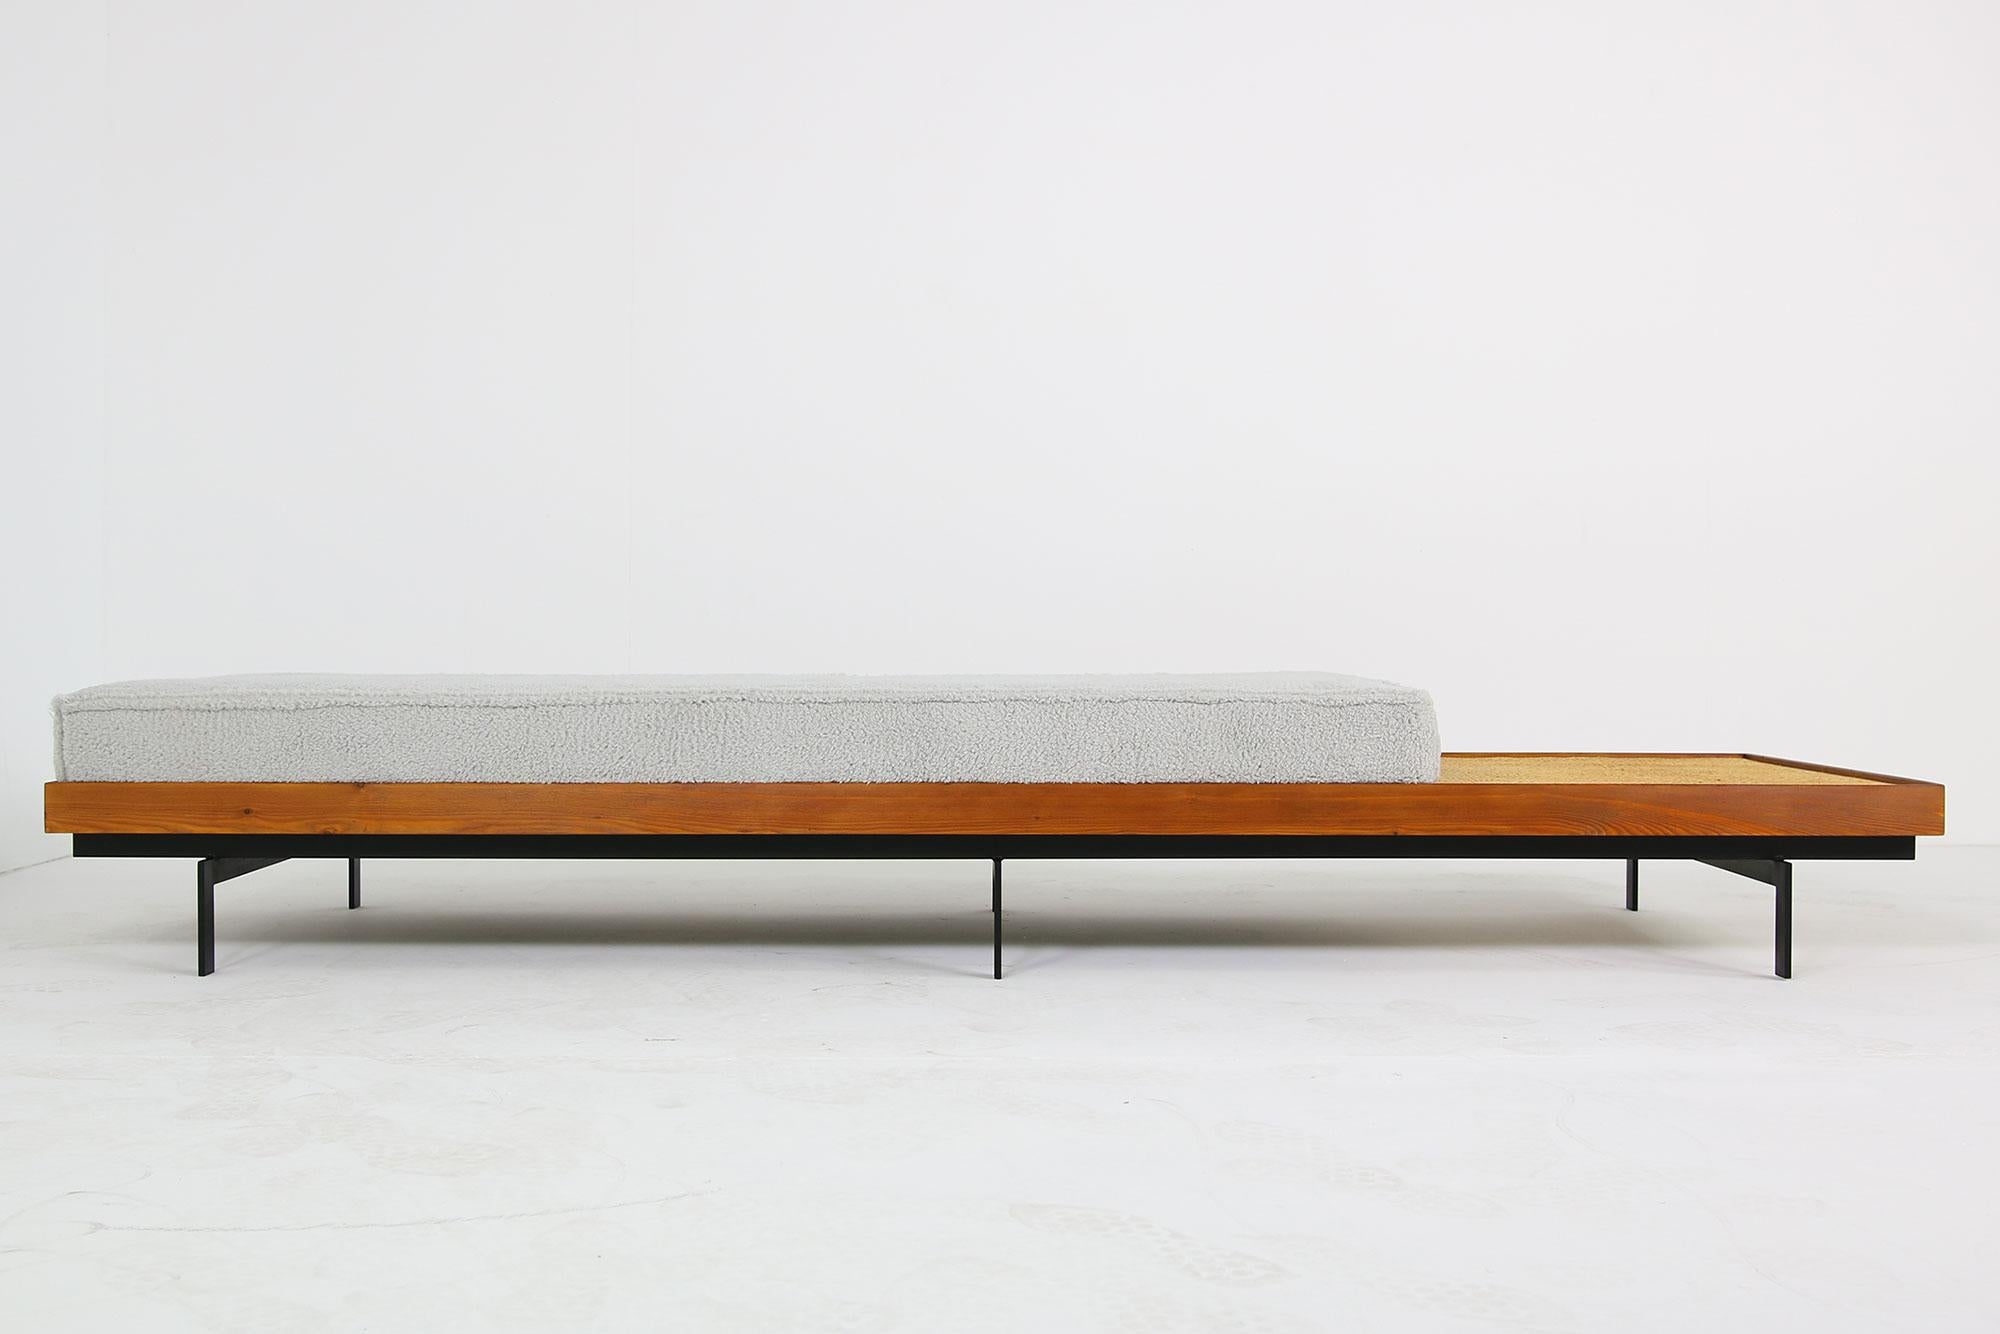 Beautiful Nathan Lindberg Siberian Larch wood (larix sibirica) super long daybed, teak vintage stained, all done in solid wood, steel base, minimalist design but heavy weight, high density foam mattress, covered with grey eco fur, teddy bear fabric,